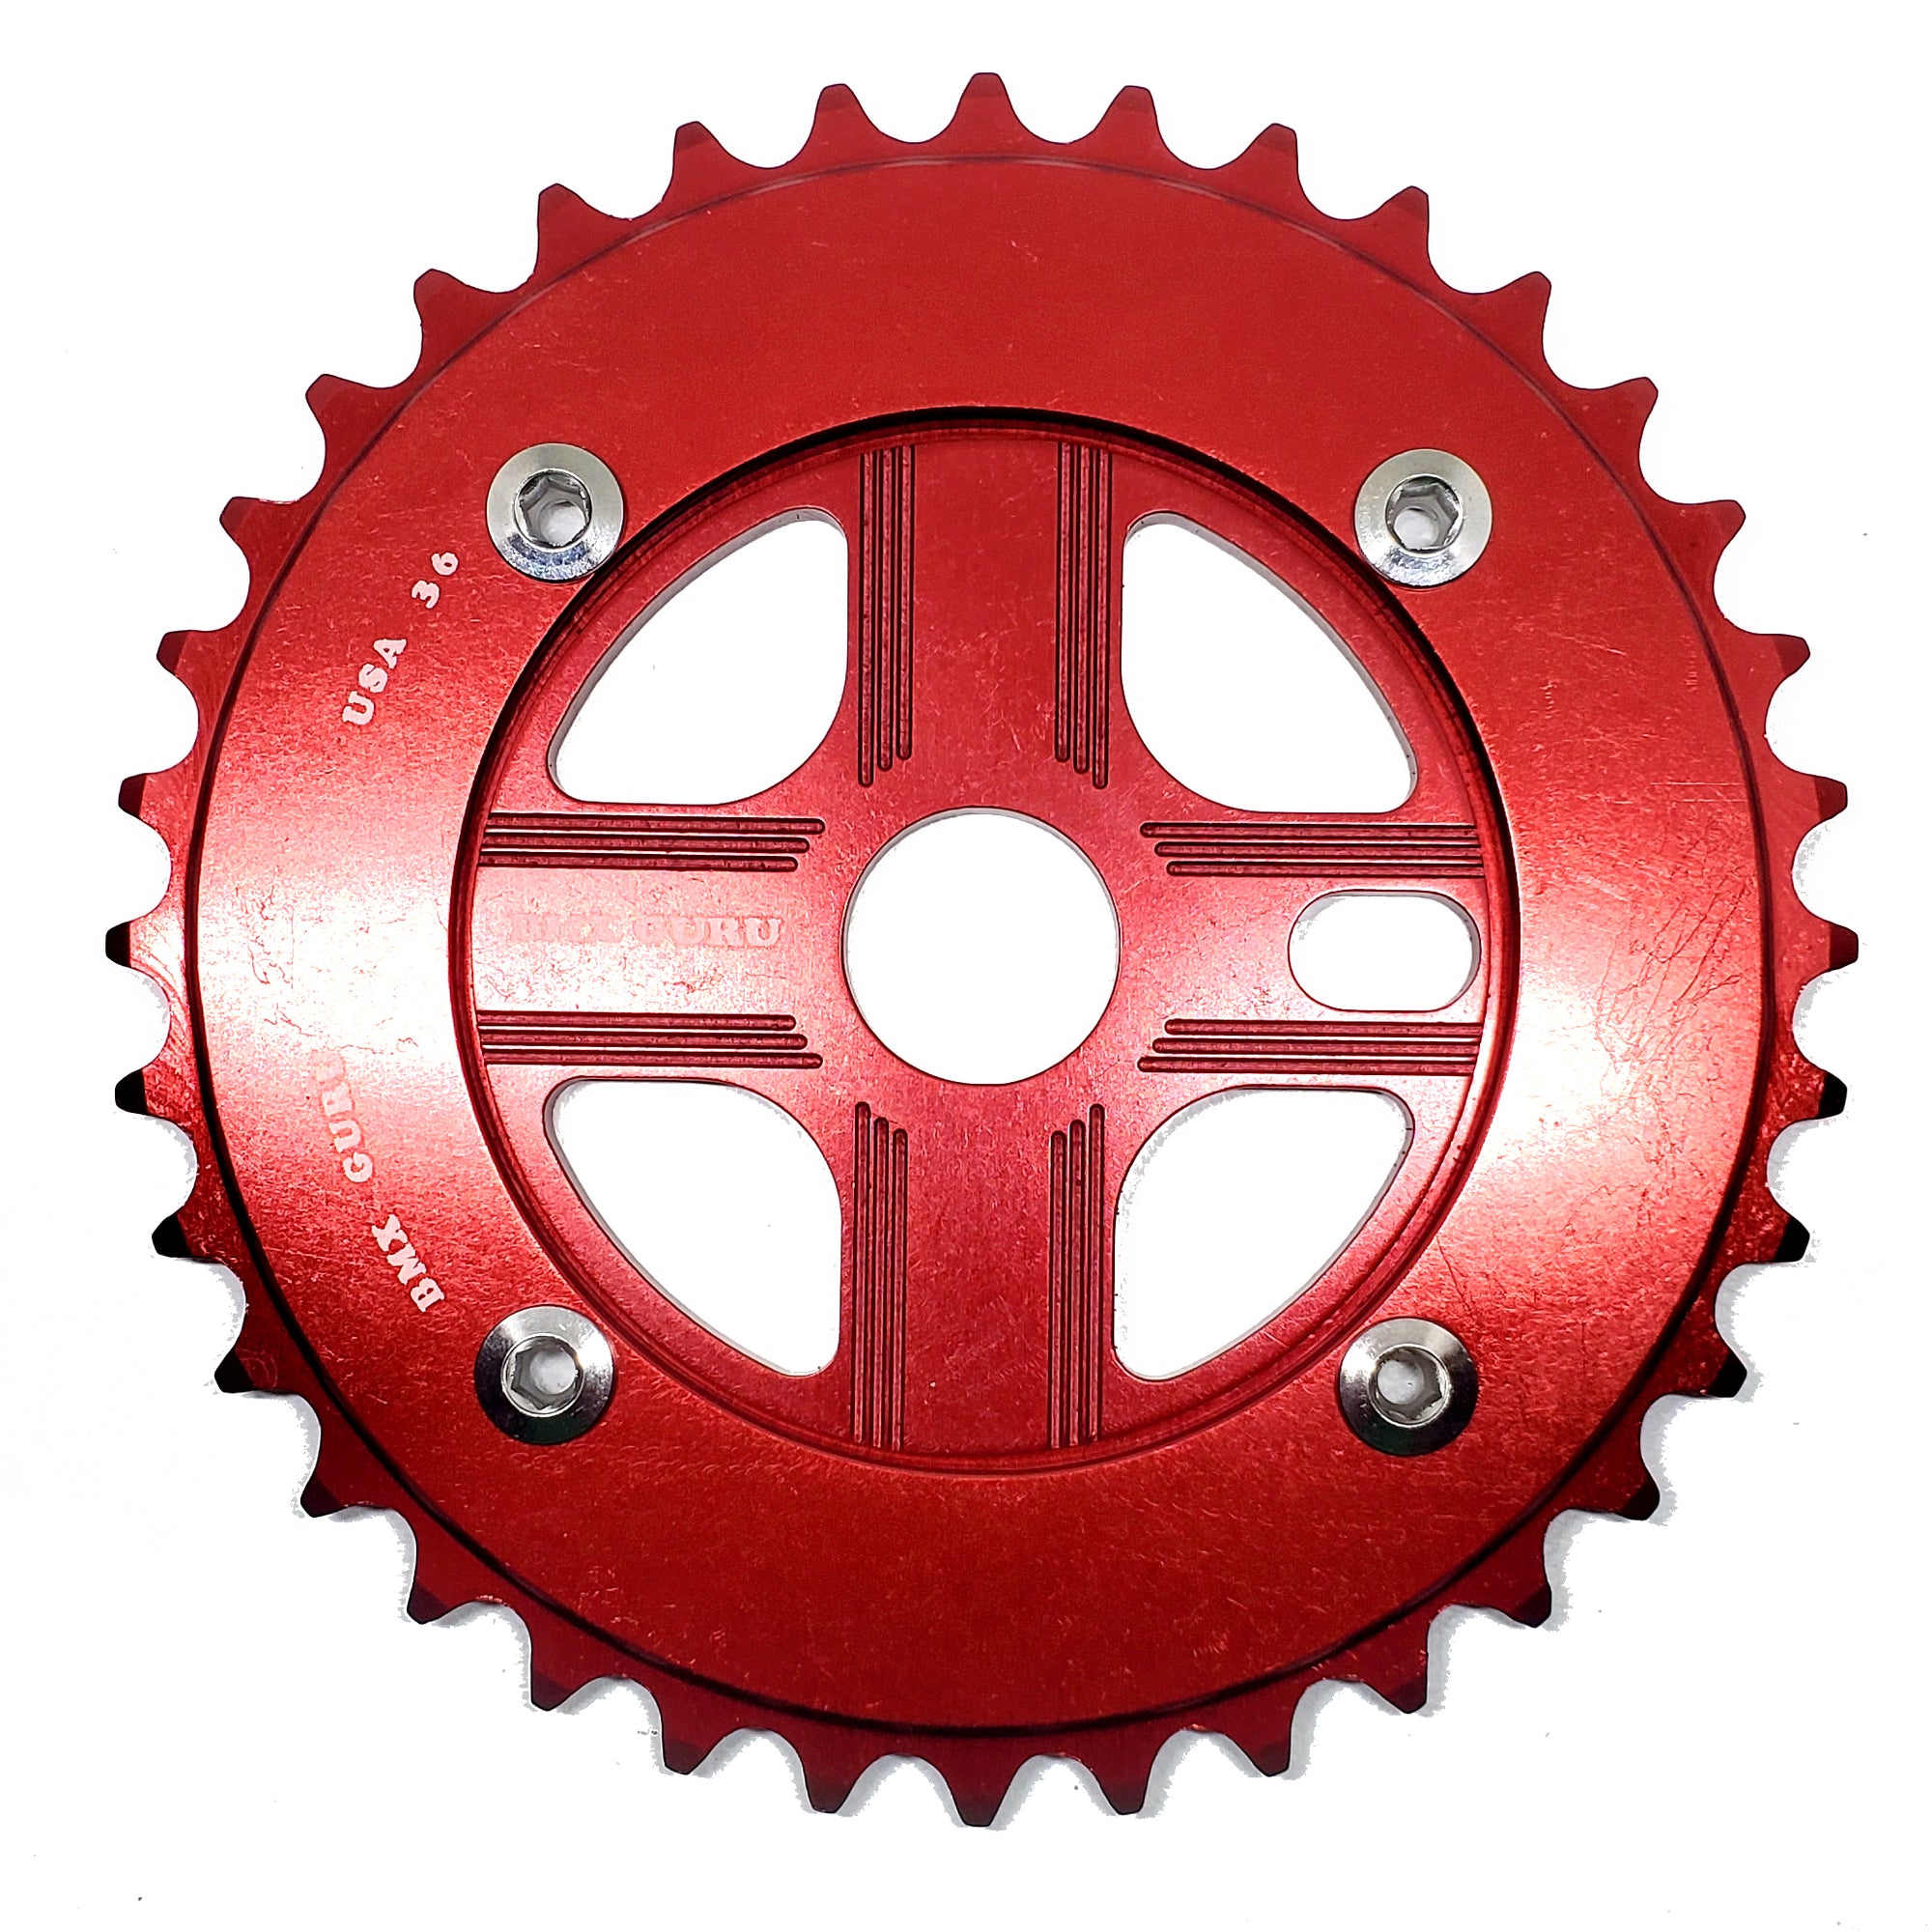 BMXGuru 36T Aluminum Spider & 4-bolt Chainring Combo - Red over Red - USA Made